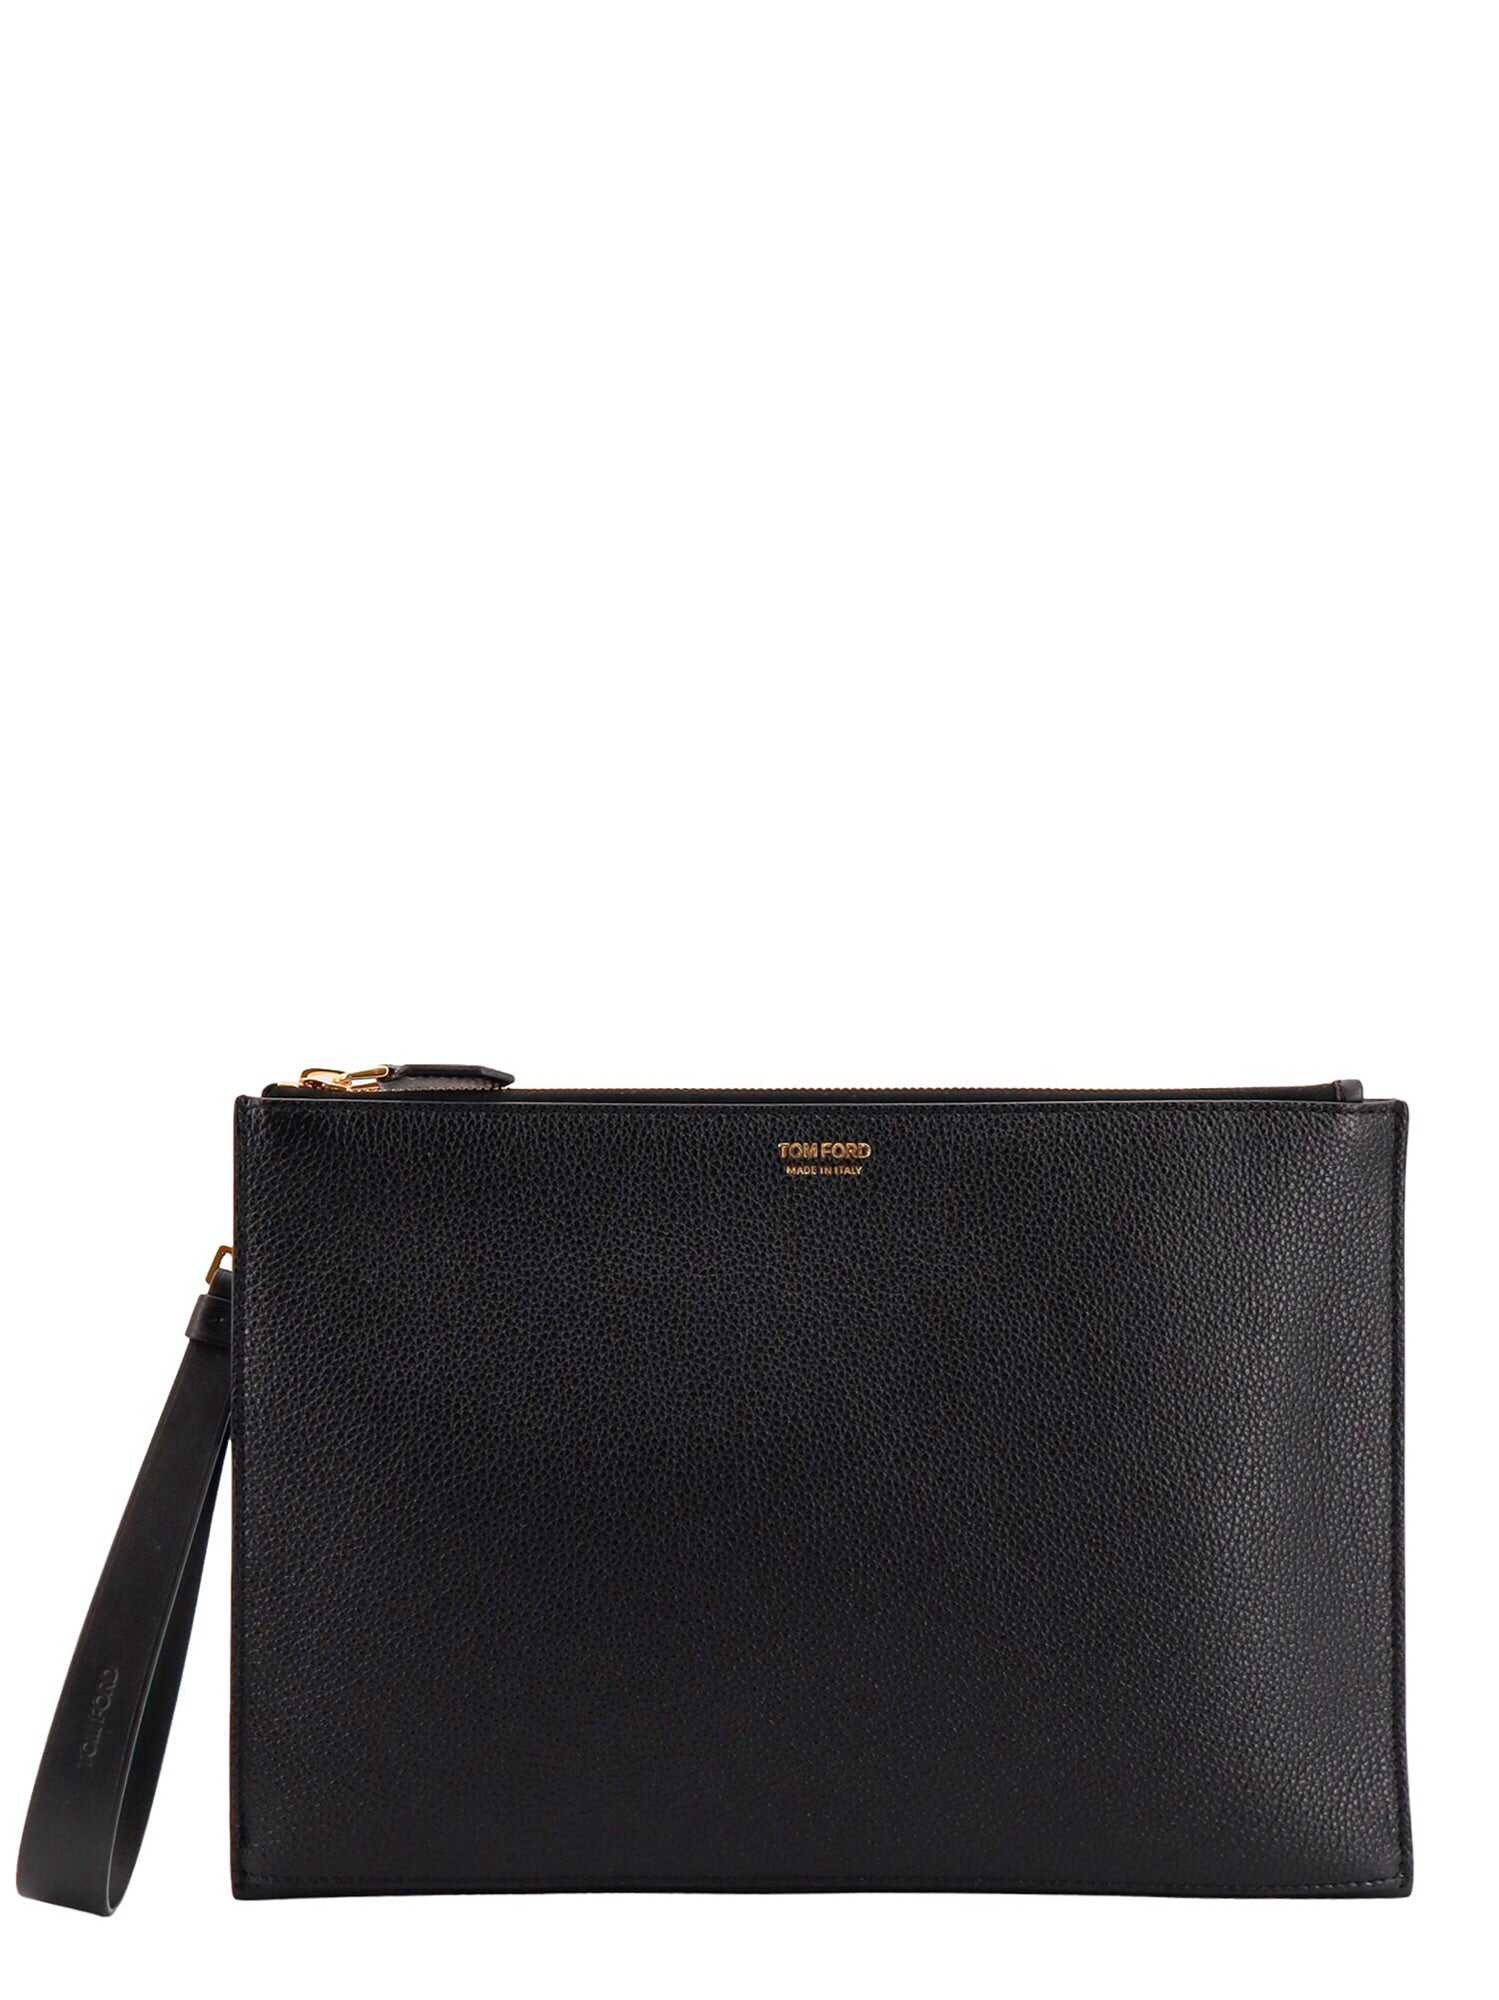 TOM FORD TOM FORD LEATHER FLAT POUCH BLACK